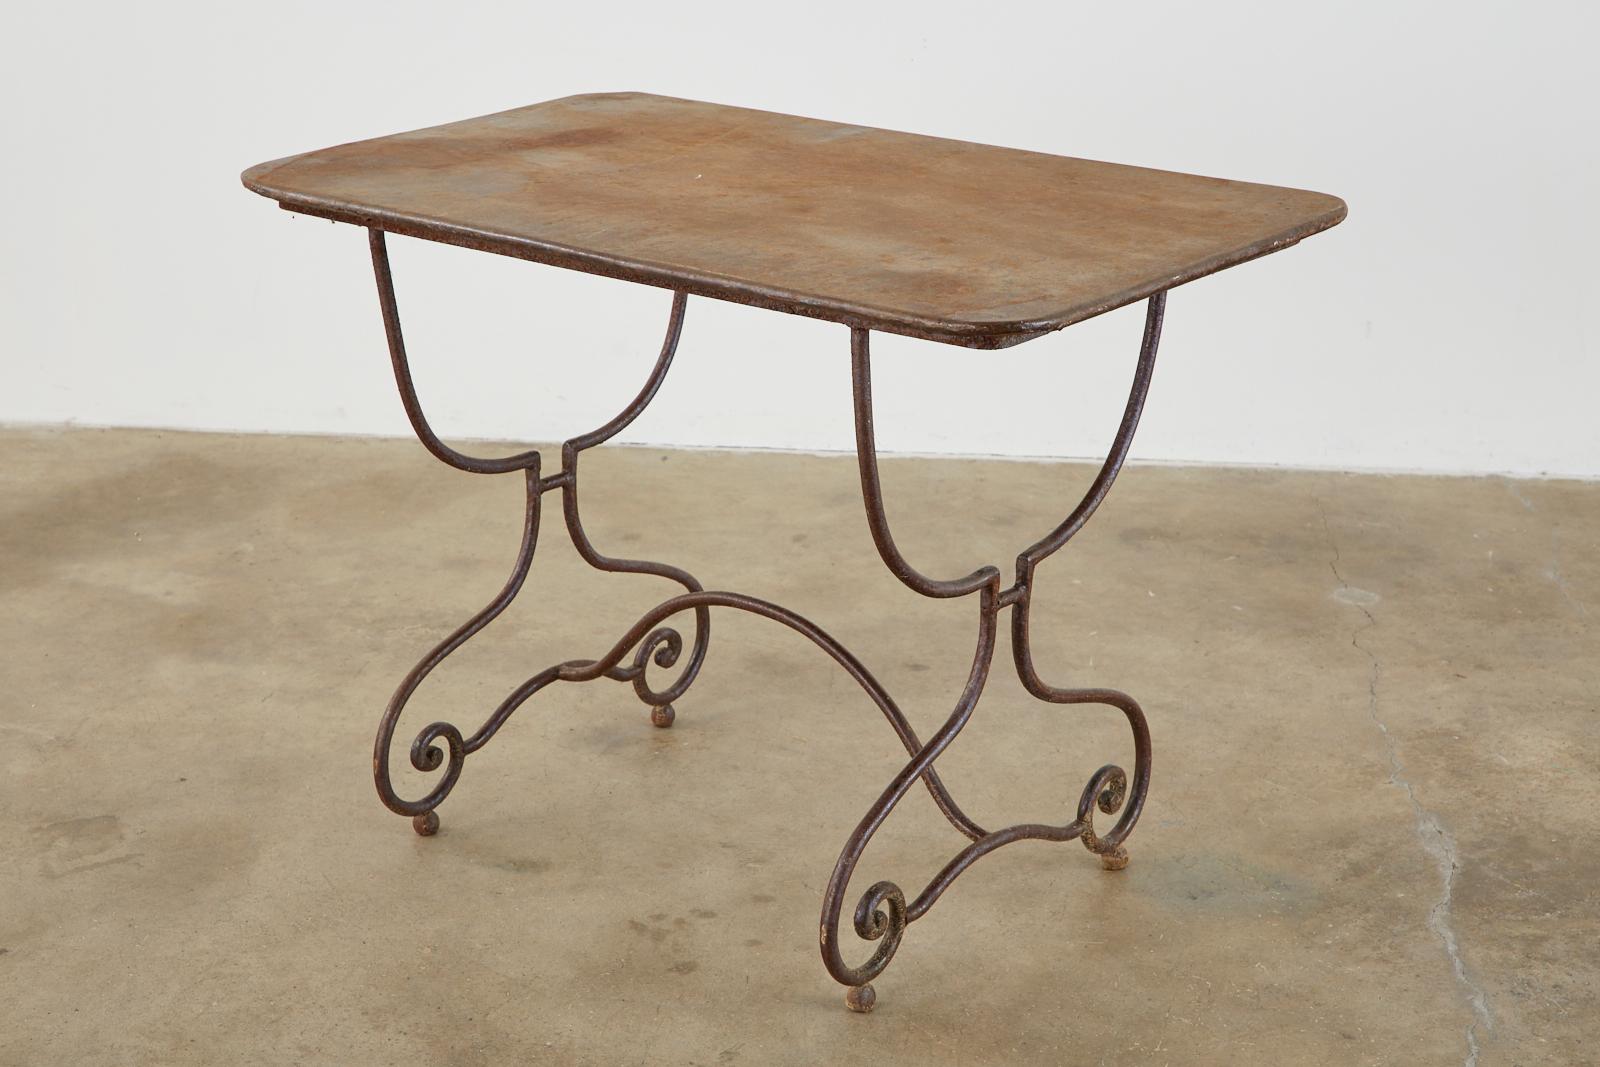 20th Century French Art Nouveau Iron Bistro Dining Table